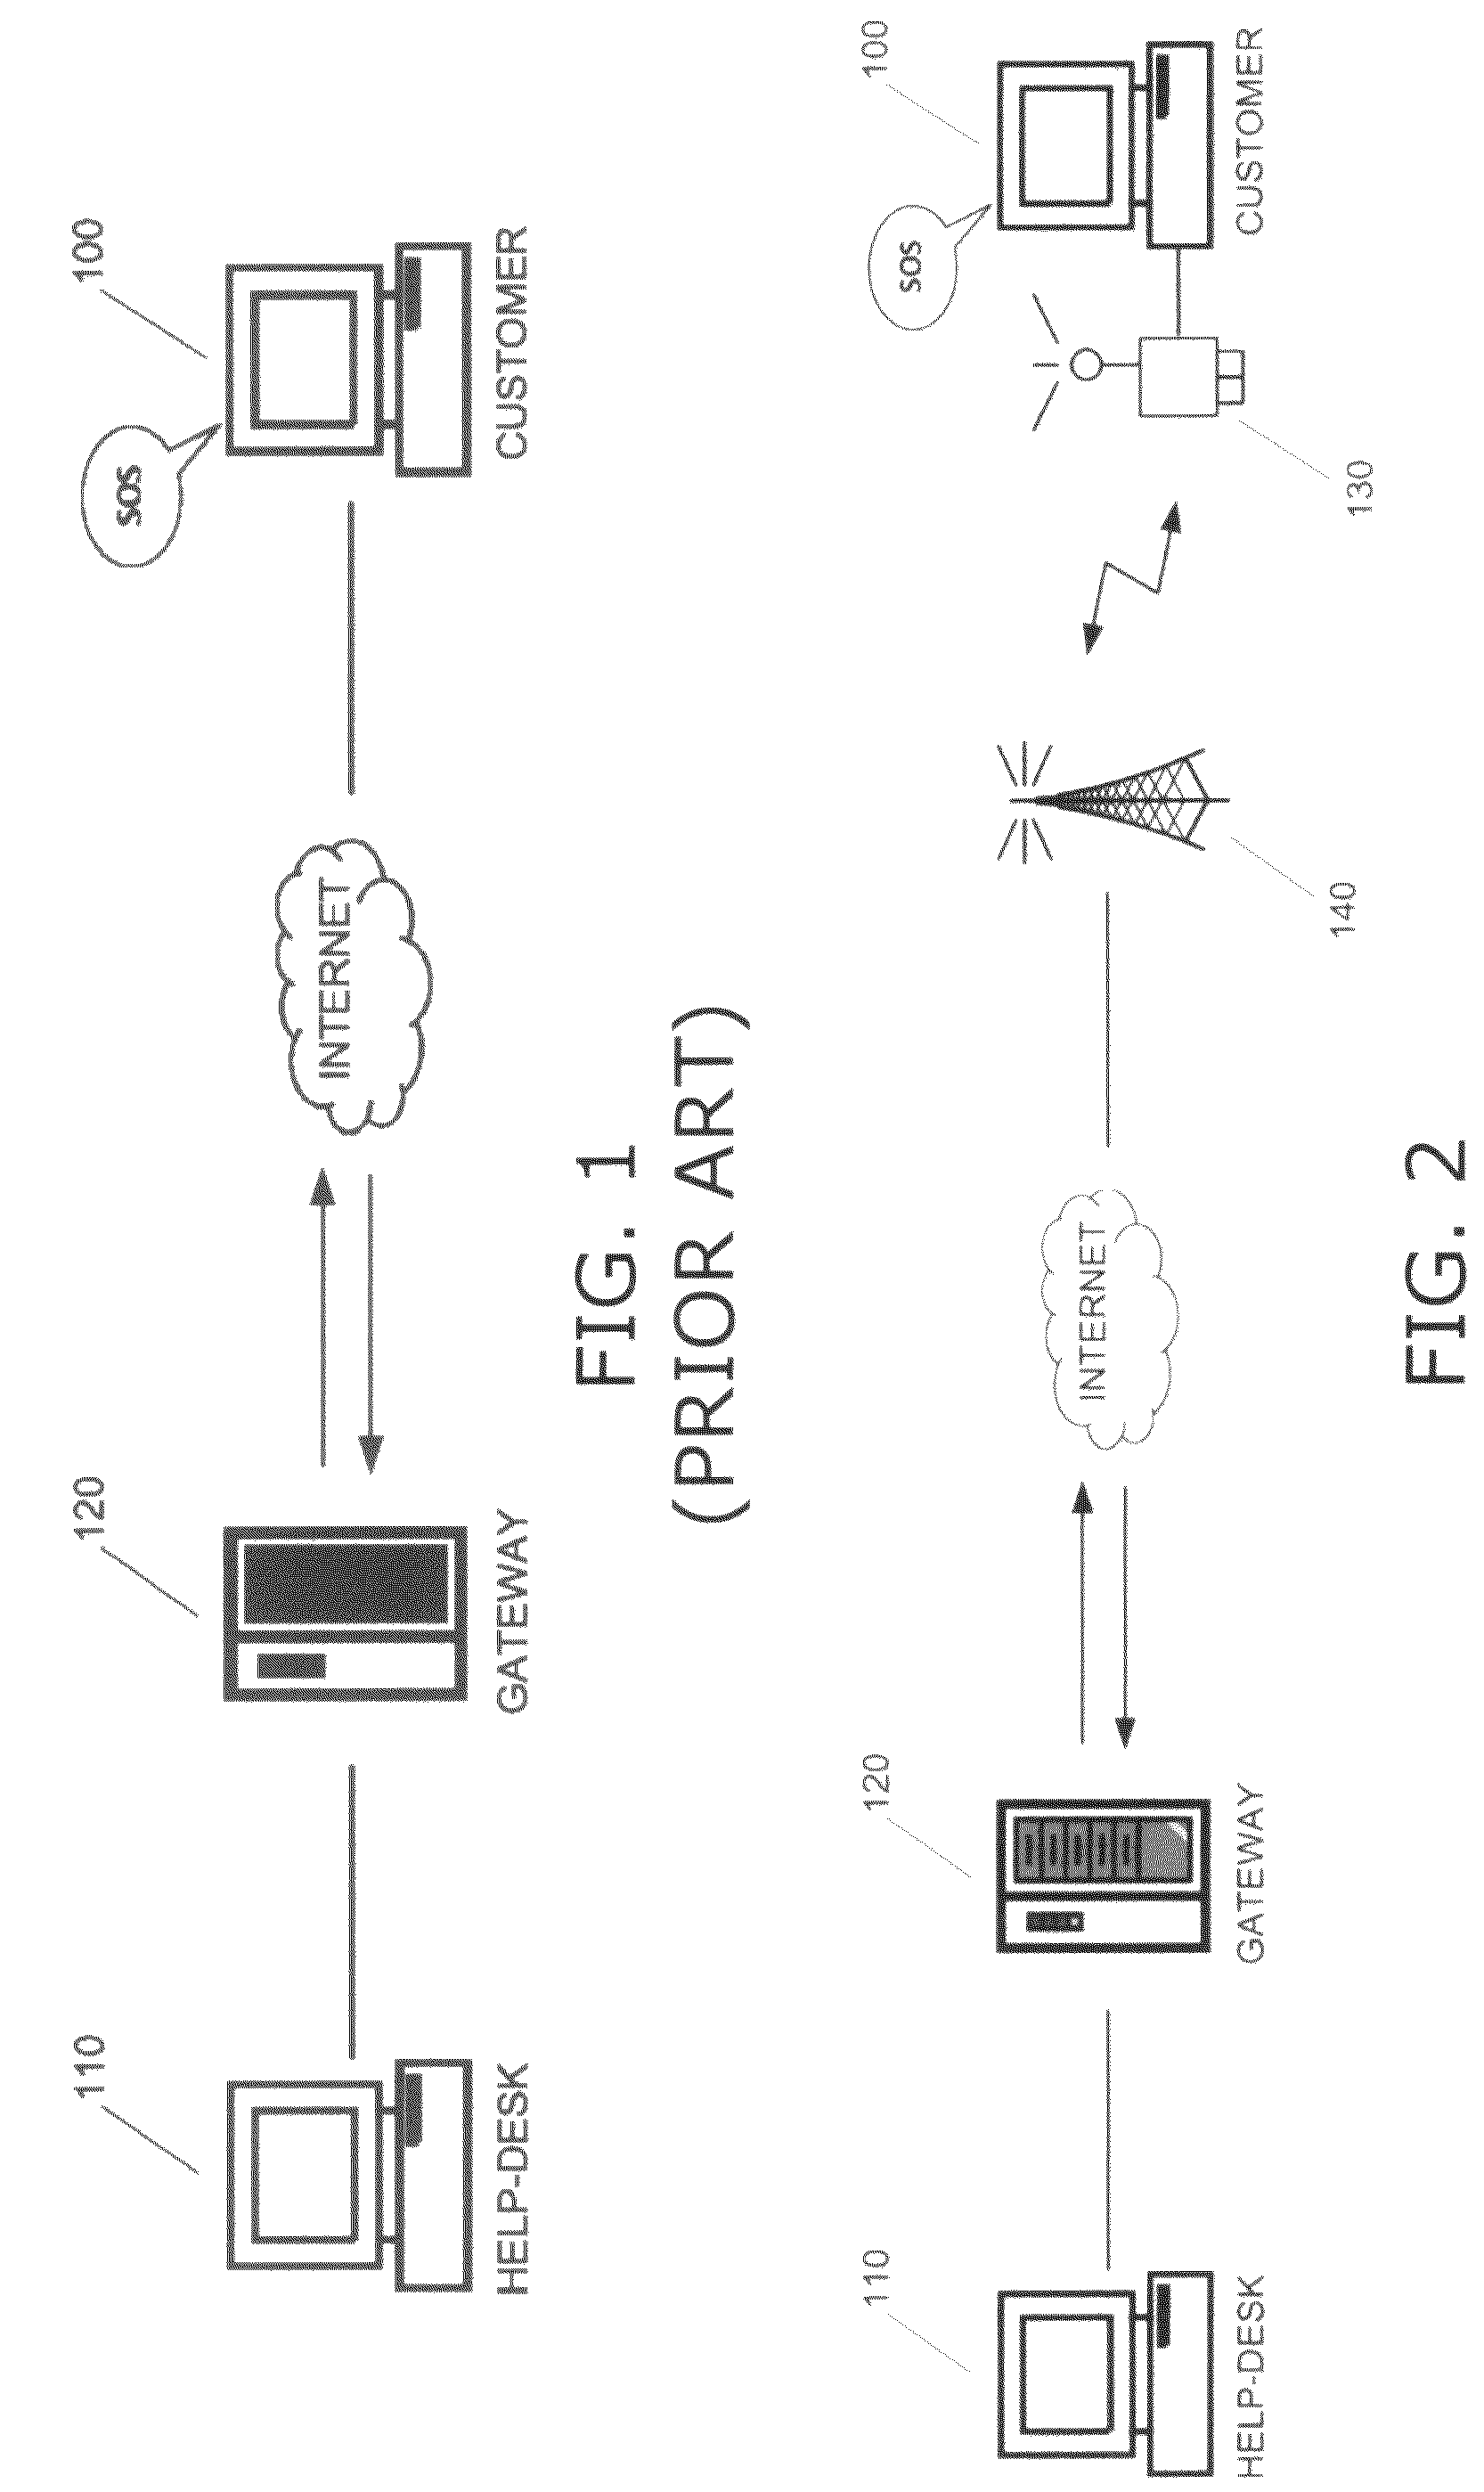 Method and system for remote diagnostics